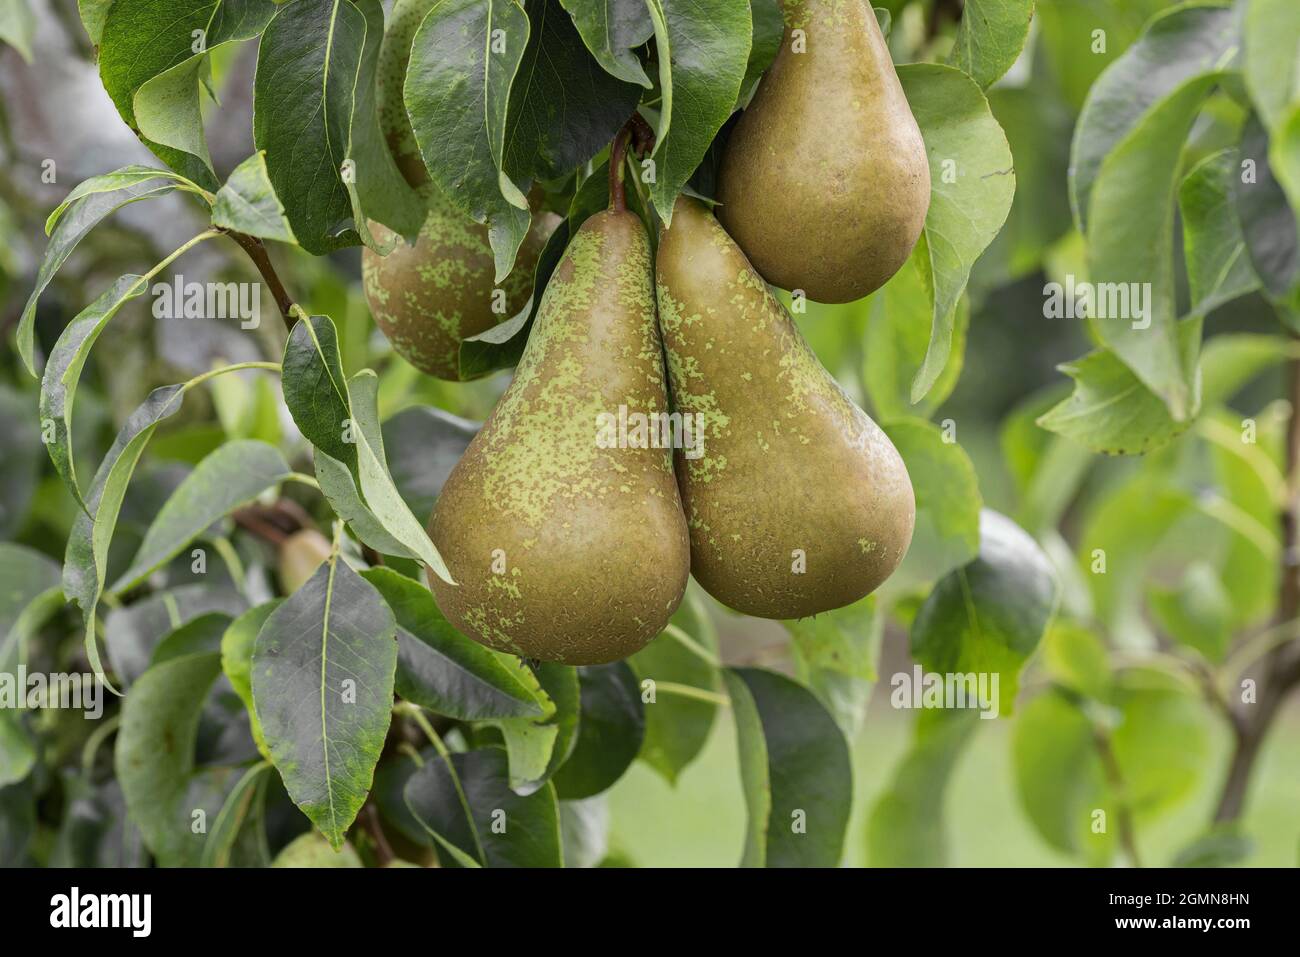 Common pear (Pyrus communis 'Conference', Pyrus communis Conference), pear on a tree, cultivar Conference Stock Photo